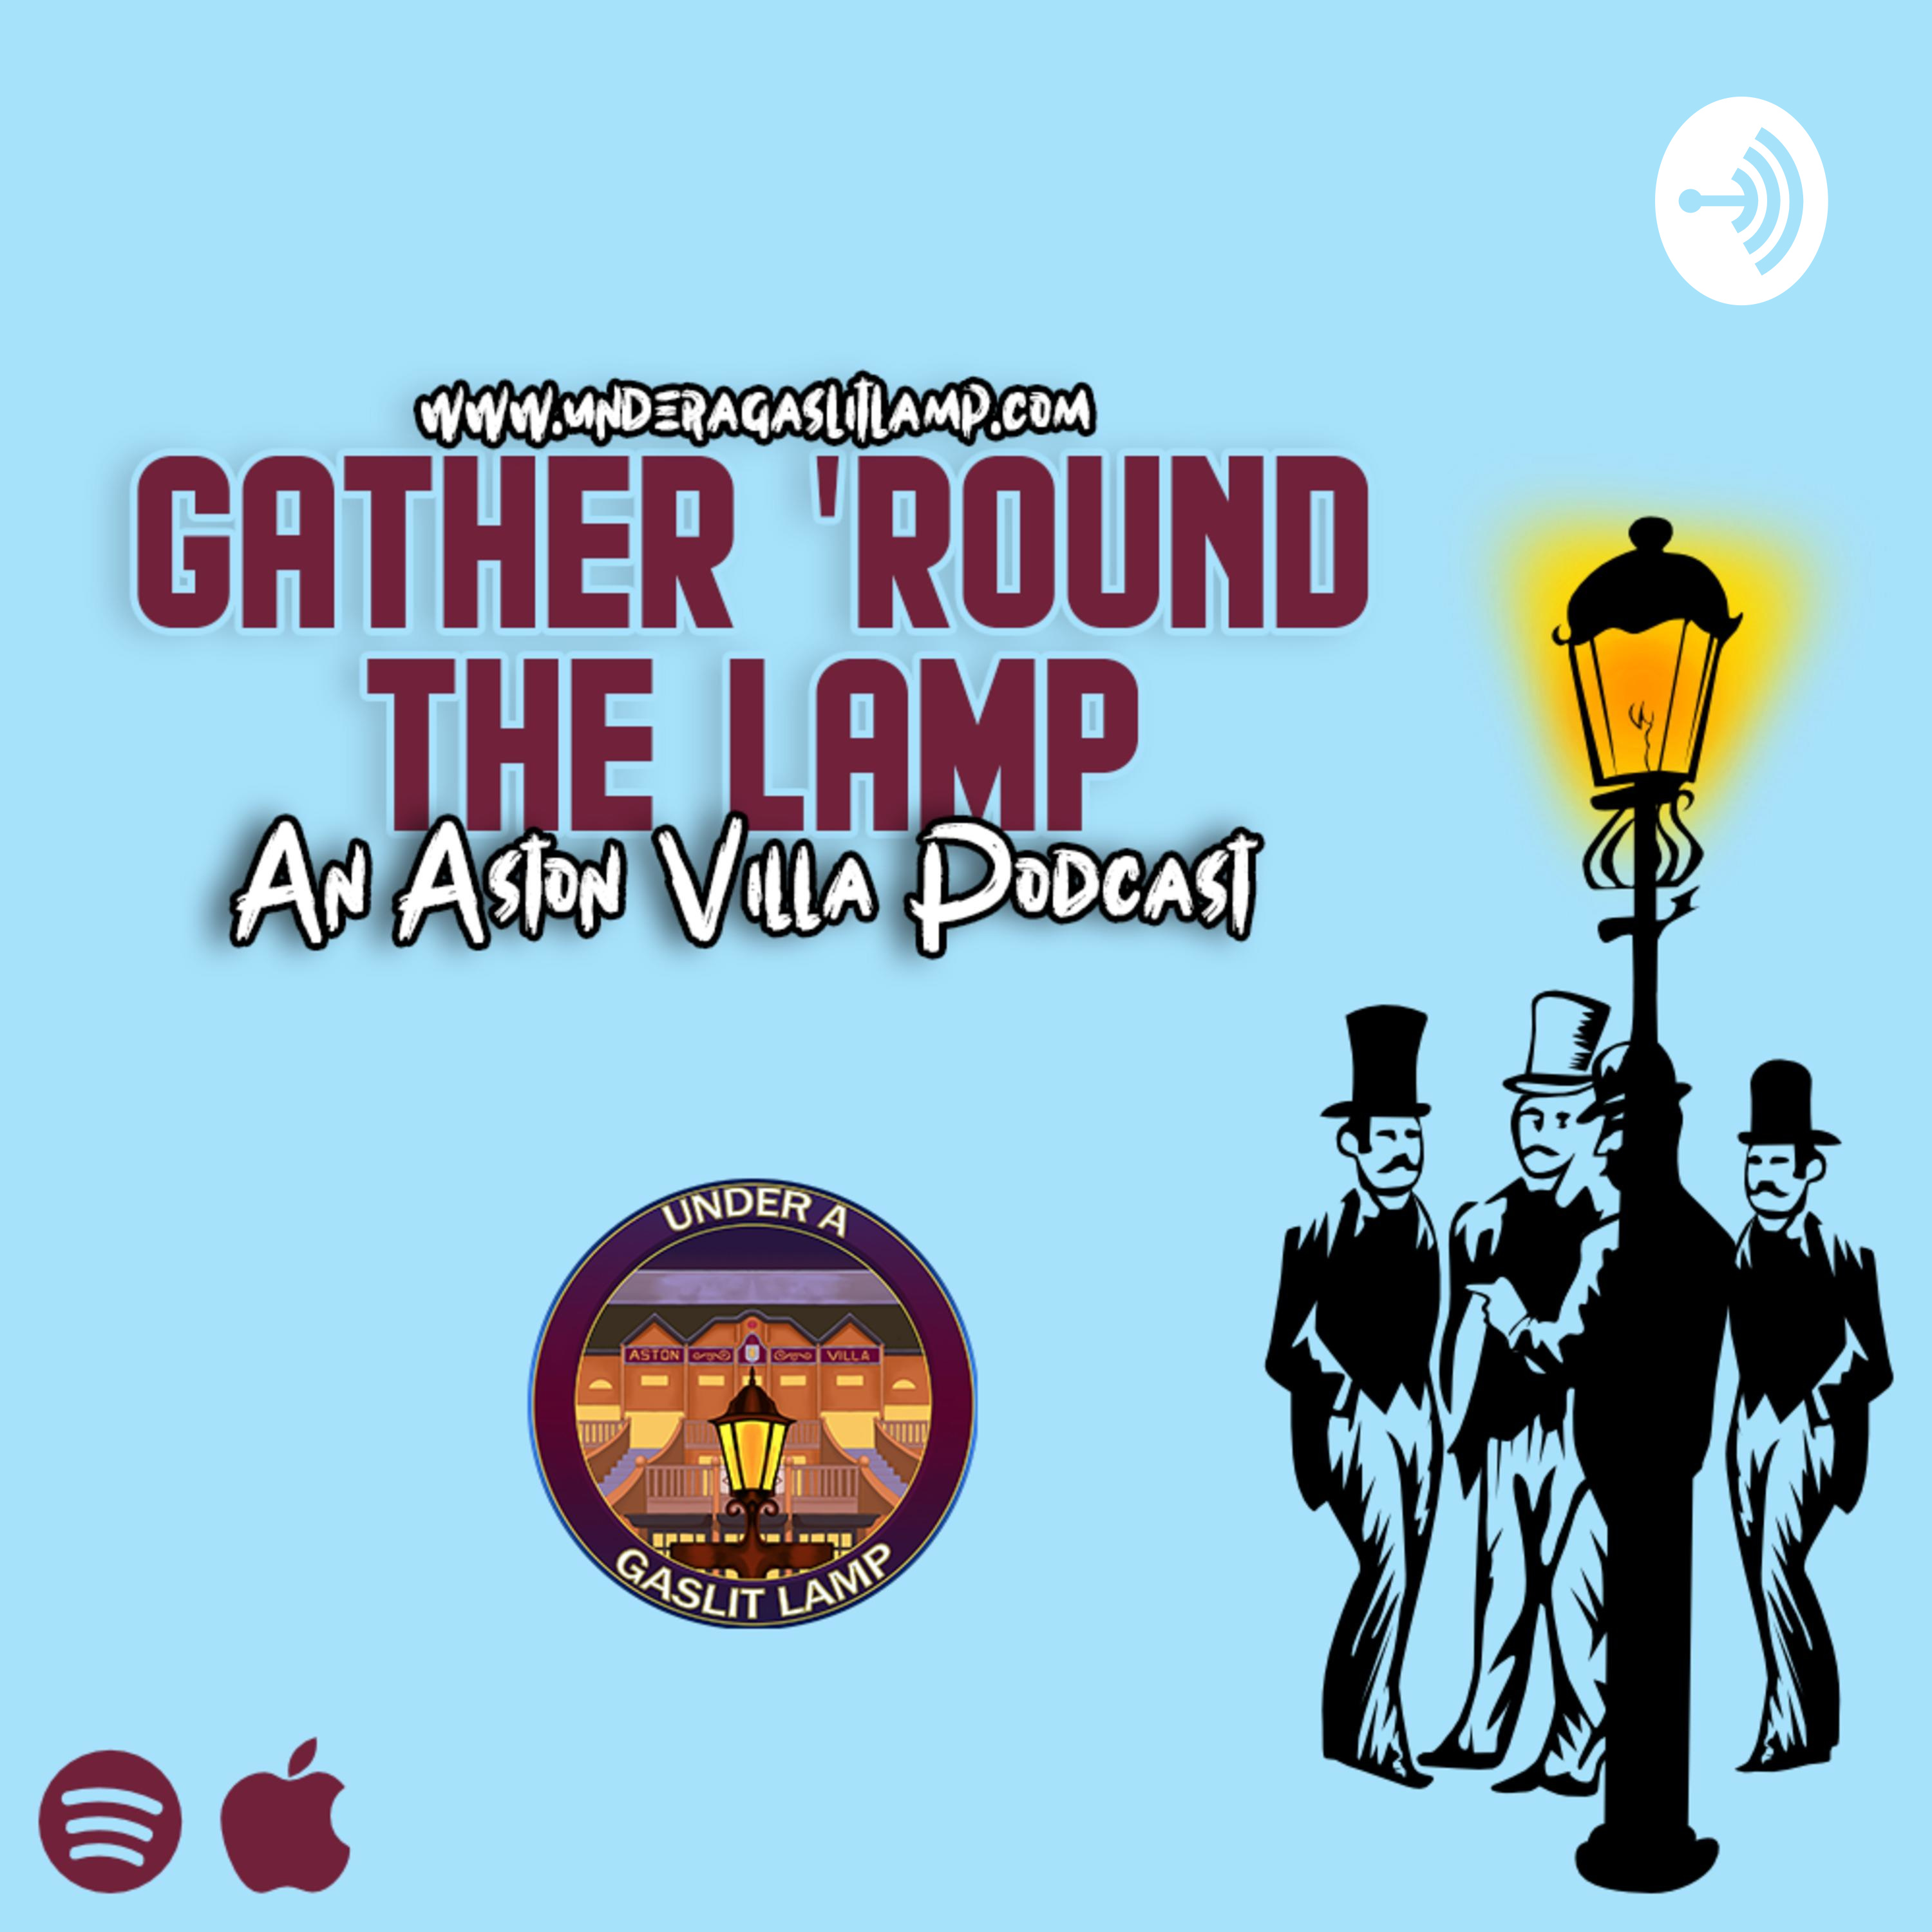 Gather ’Round The Lamp S4 E24 - Reverting to Type - Defensive Woes, A New Mings Contract and Needing a Win